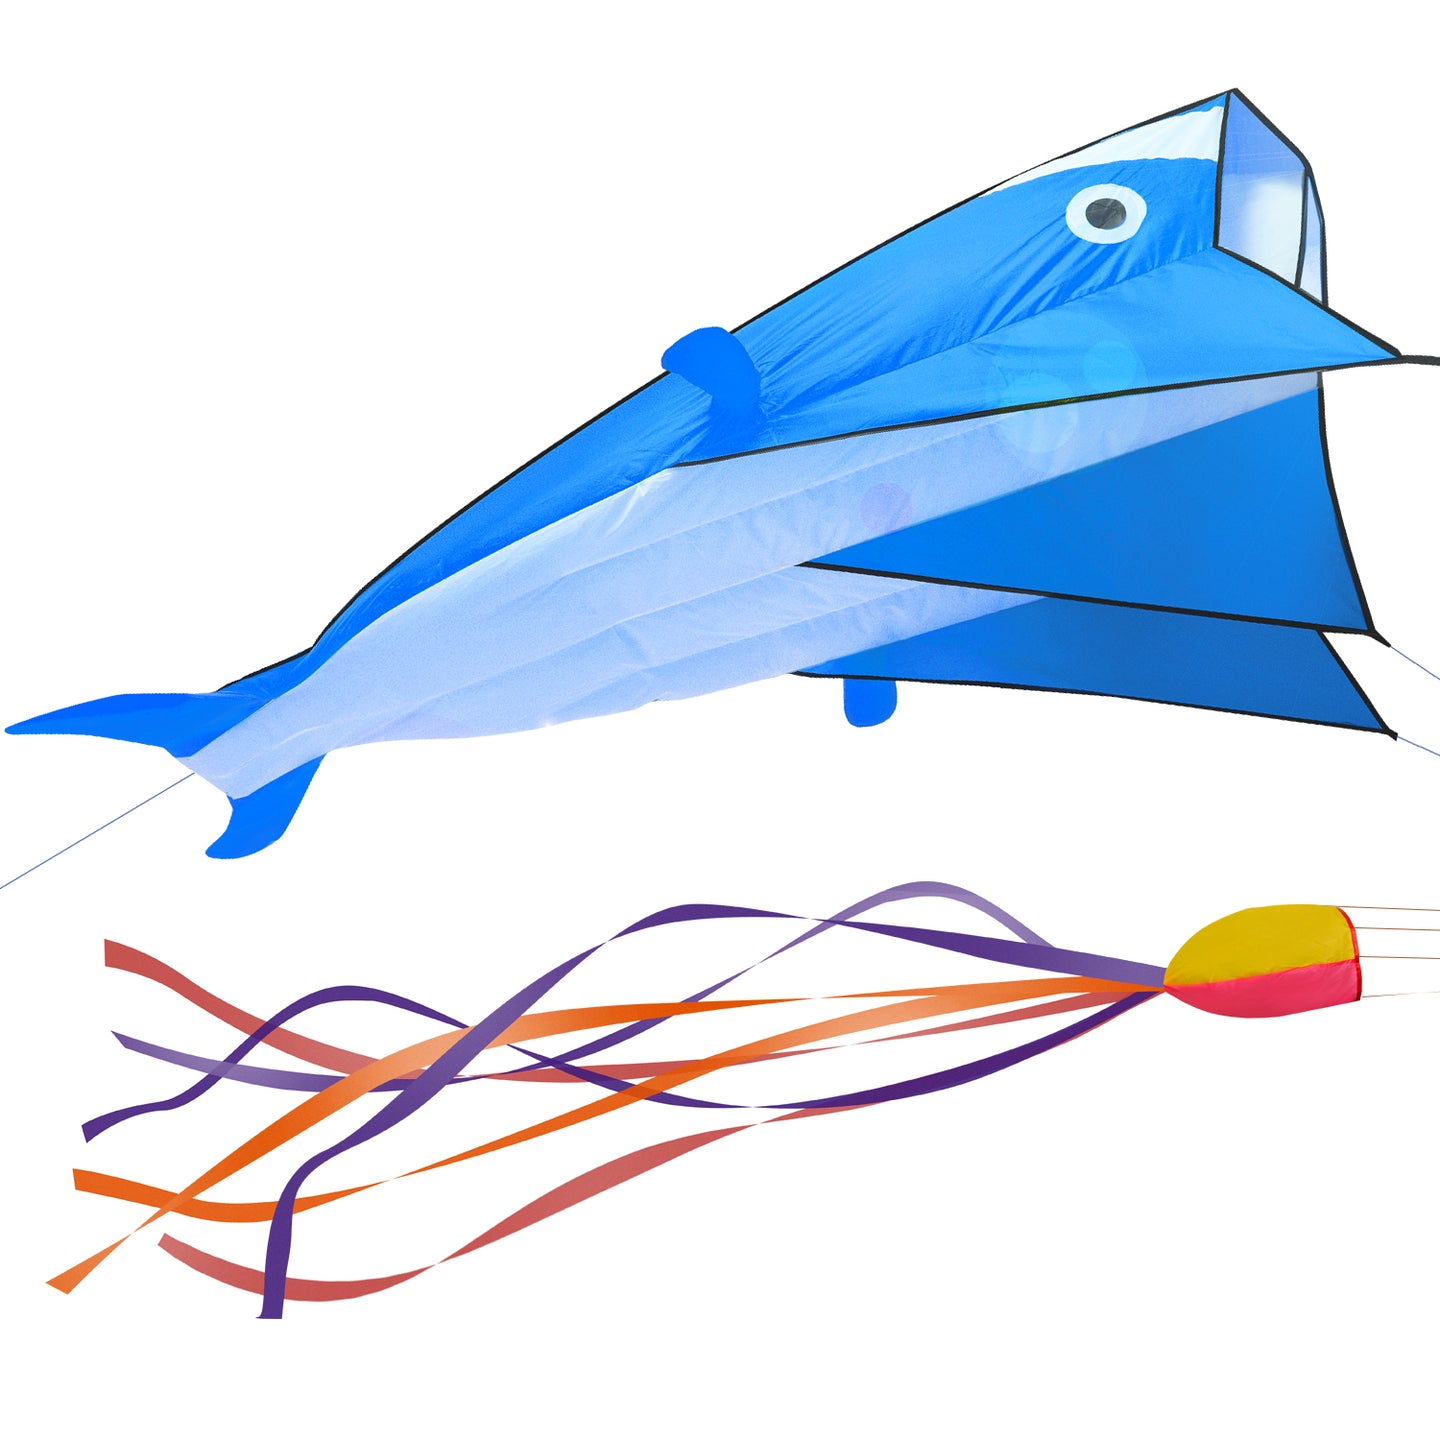 Image 3D Kite Large Blue Dolphin Breeze Beach Kites with Huge Frameless Soft Parafoil Giant,Gift for Kids,Family